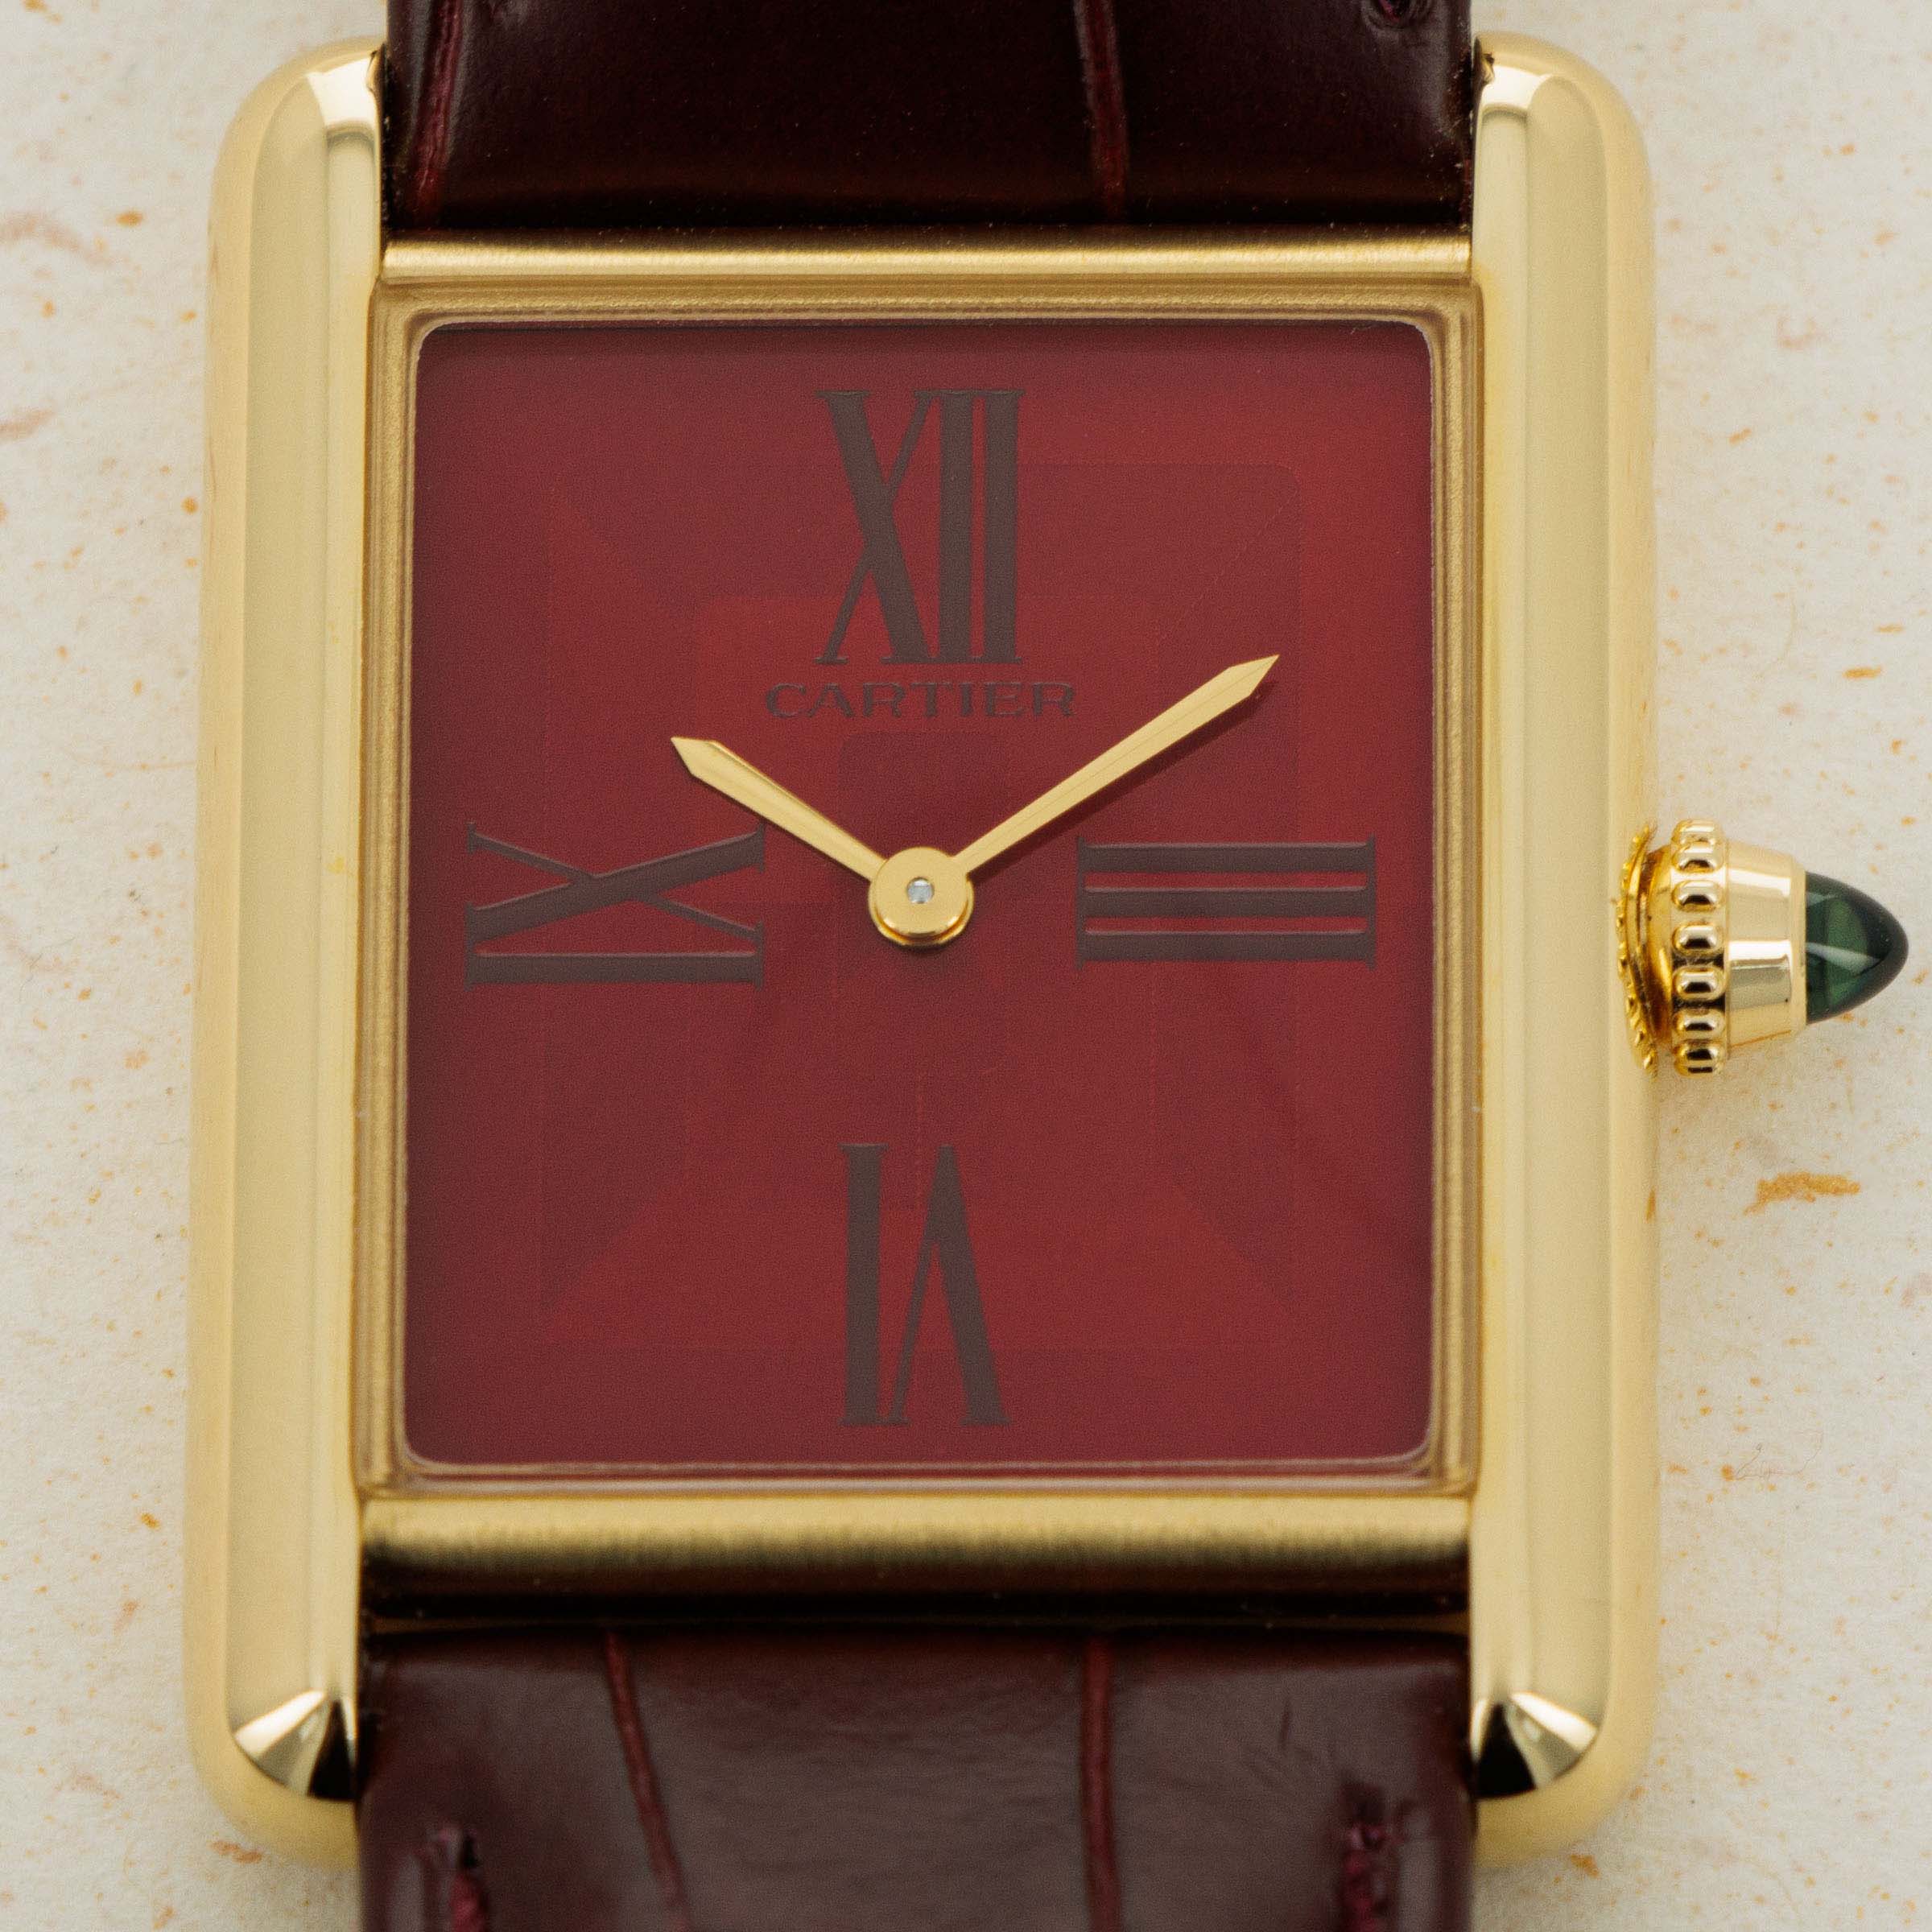 Cartier Tank Louis Cartier WGTA0093 18k YG | Auctions | Loupe This